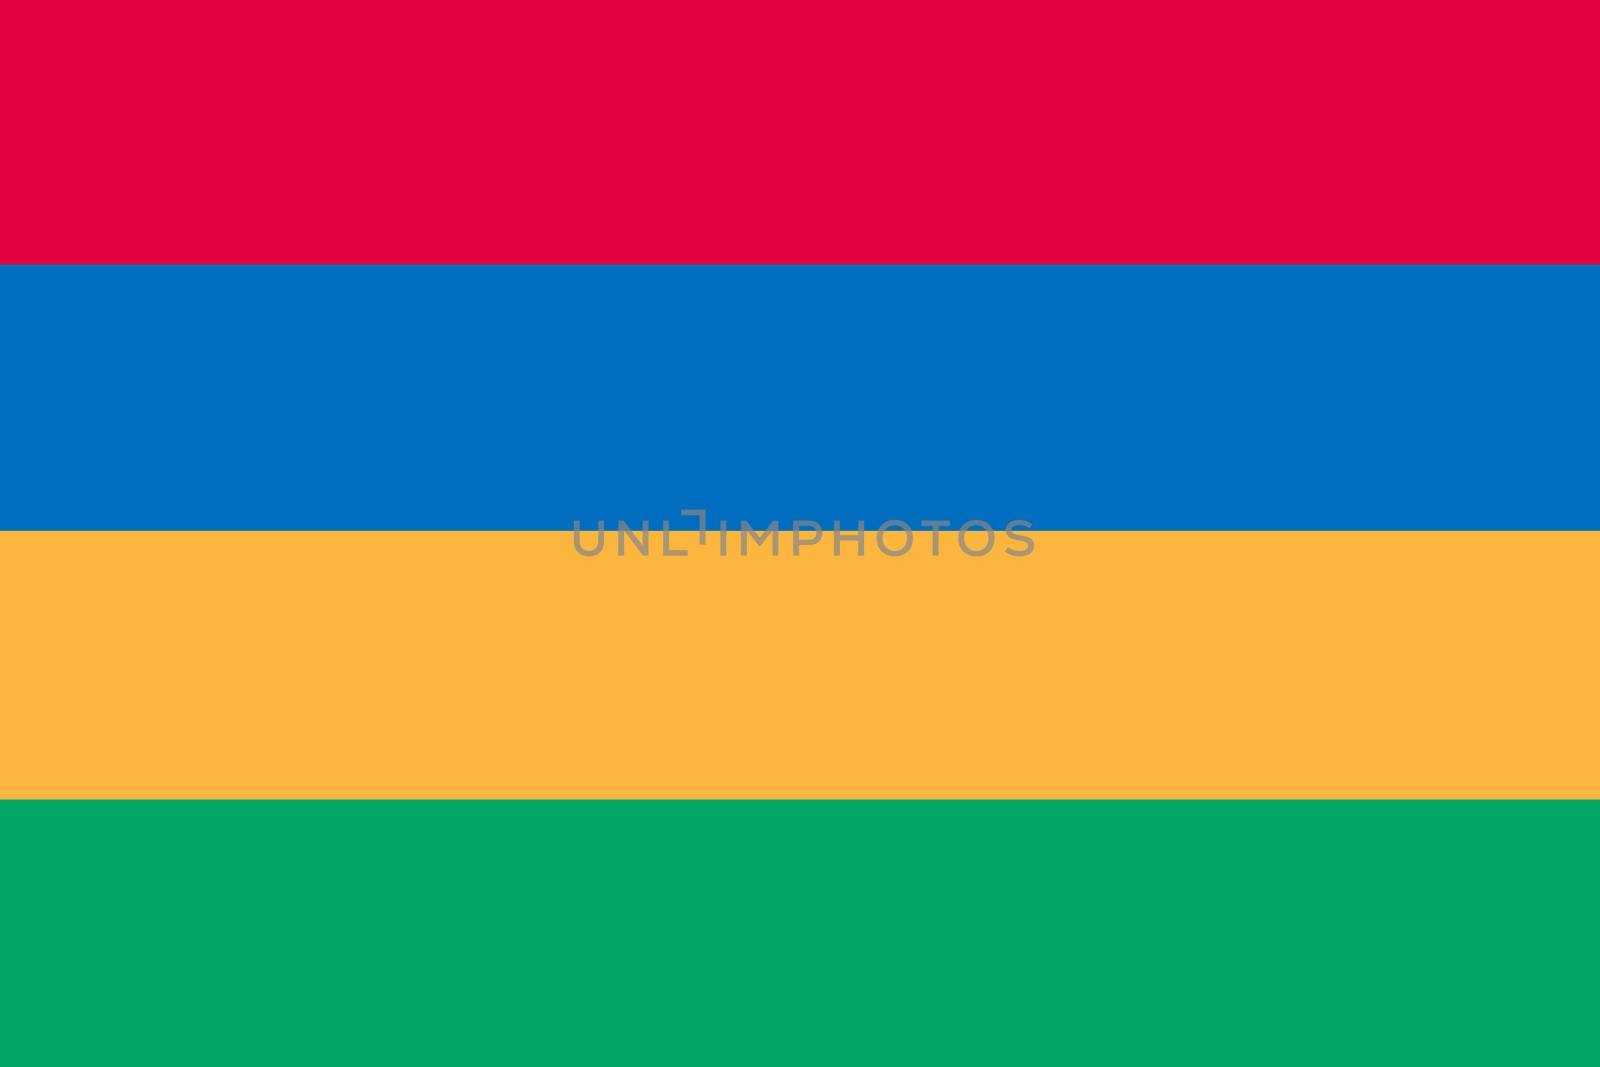 A Mauritius flag background illustration green yellow blue red stripe